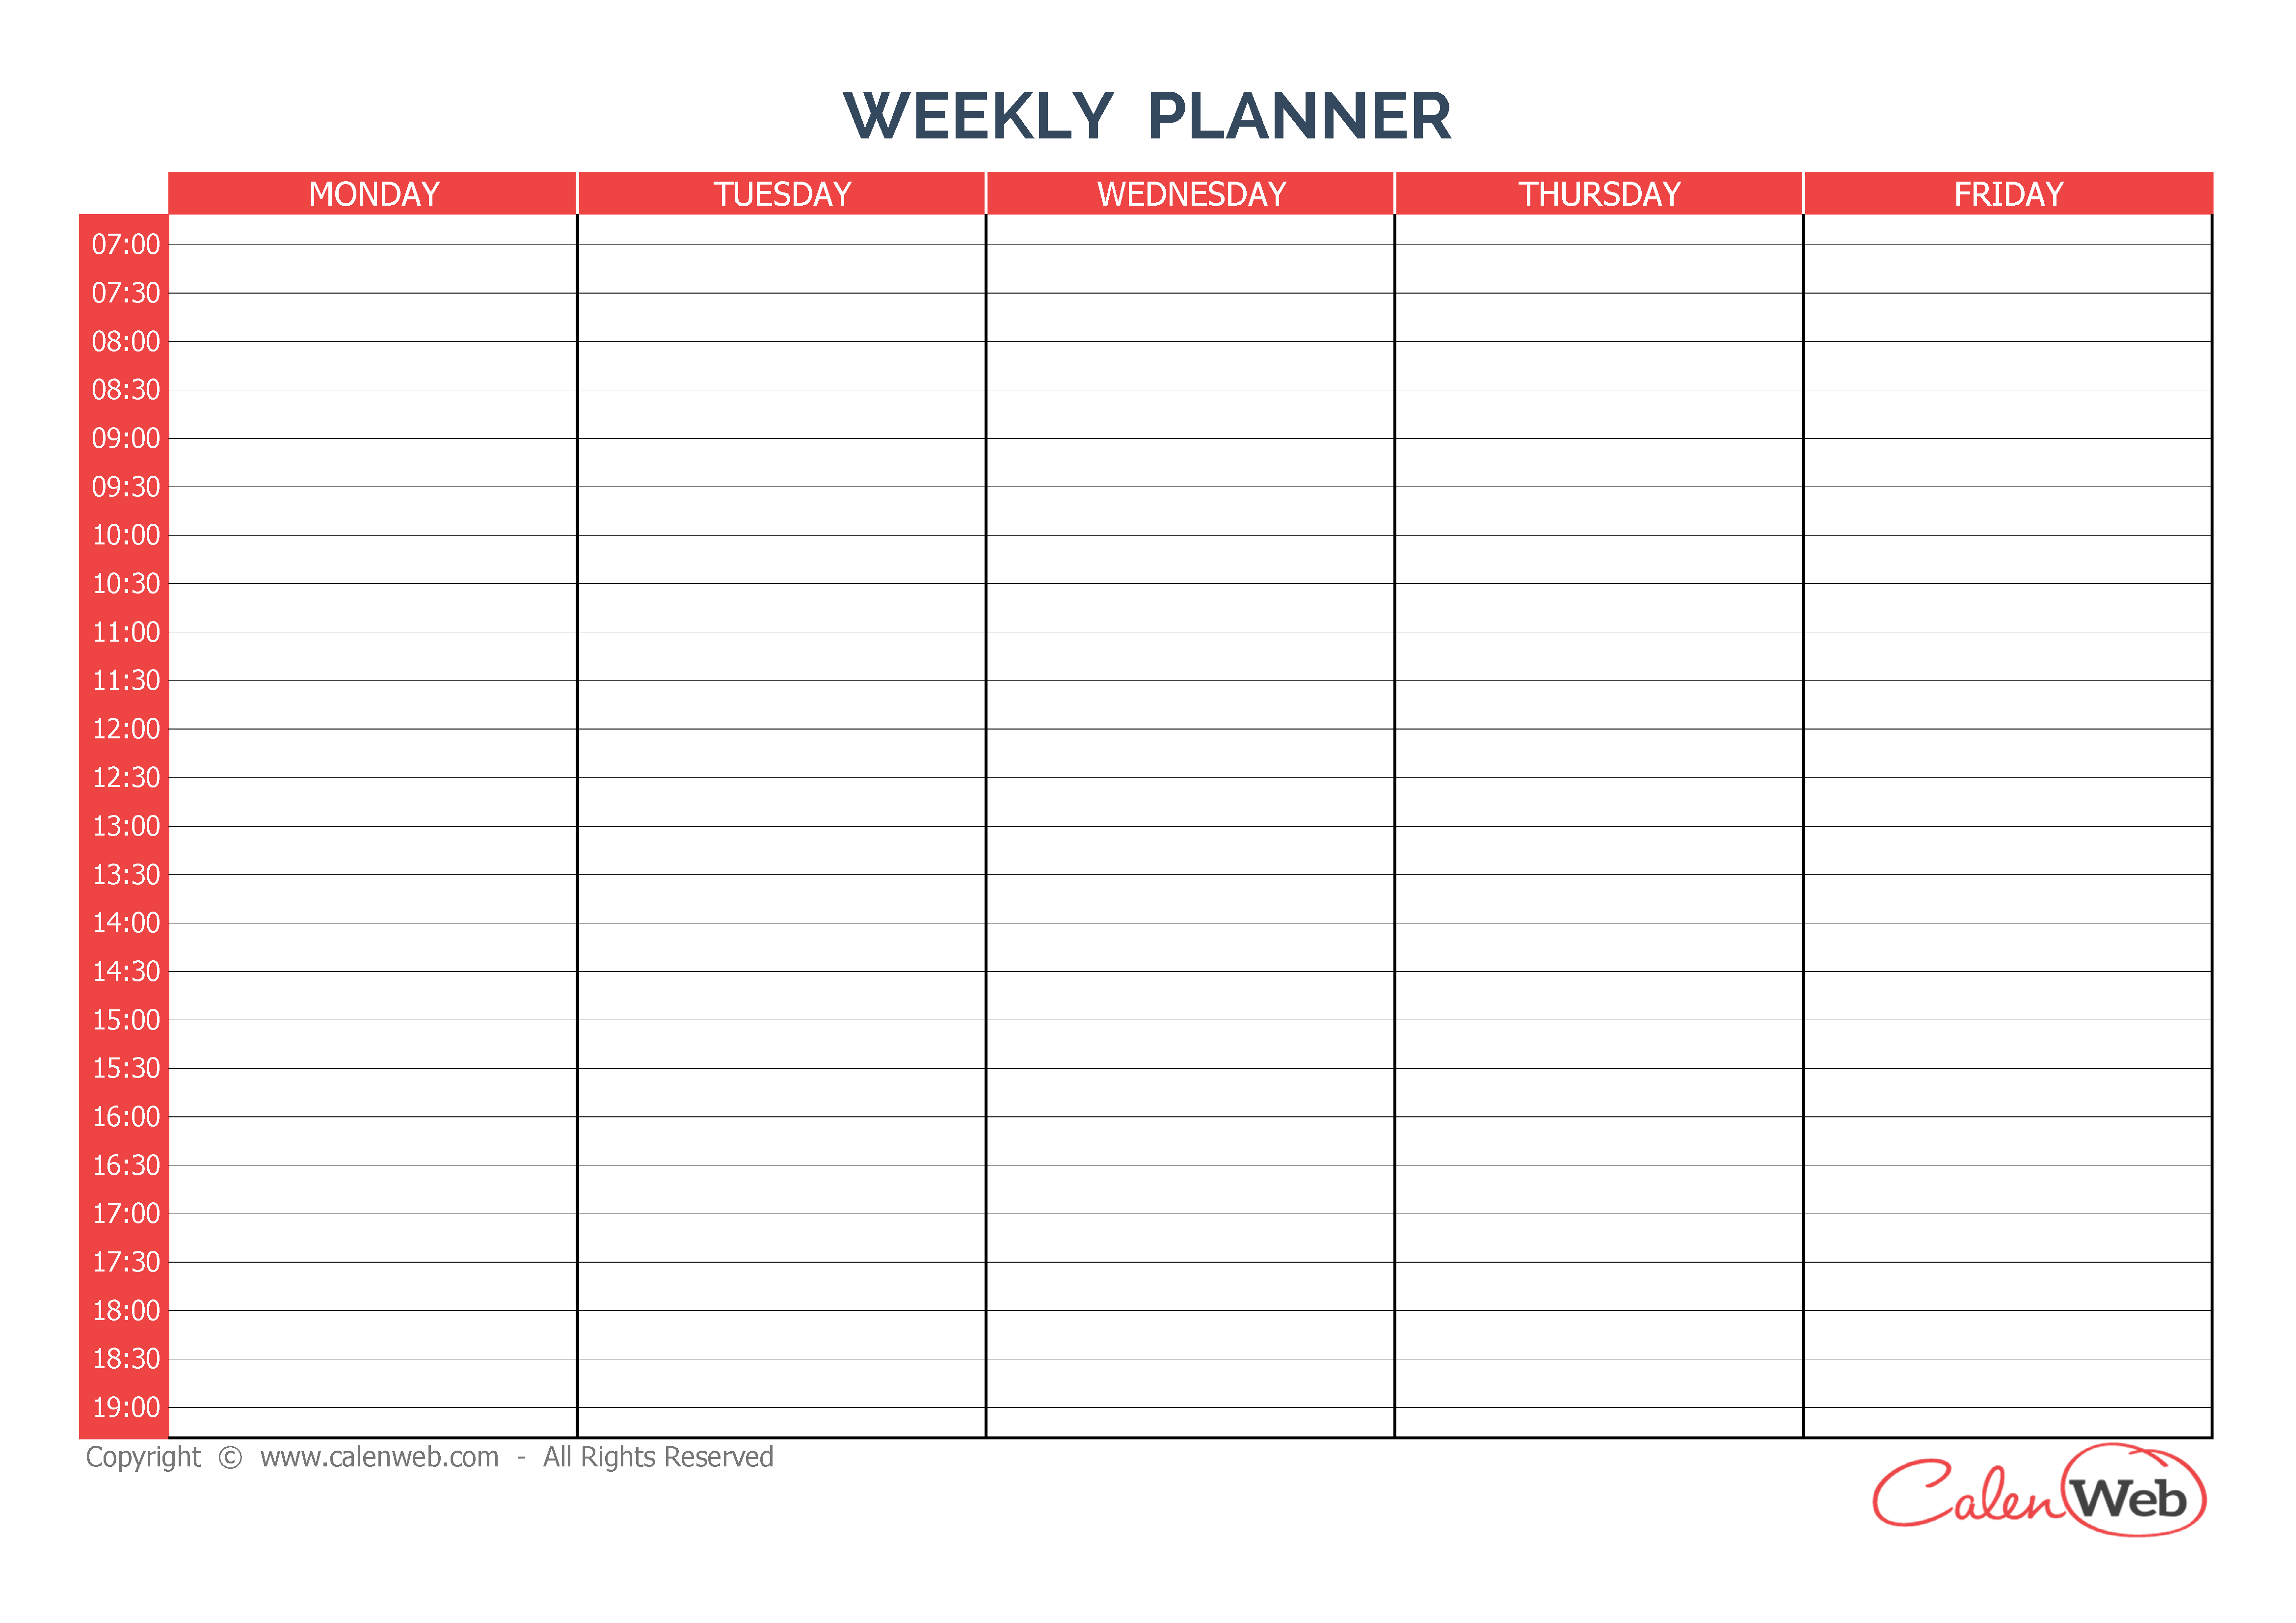 Weekly Planner 5 Days A Week Of 5 Days  Calenweb pertaining to Printable 5 Day Week Calendar